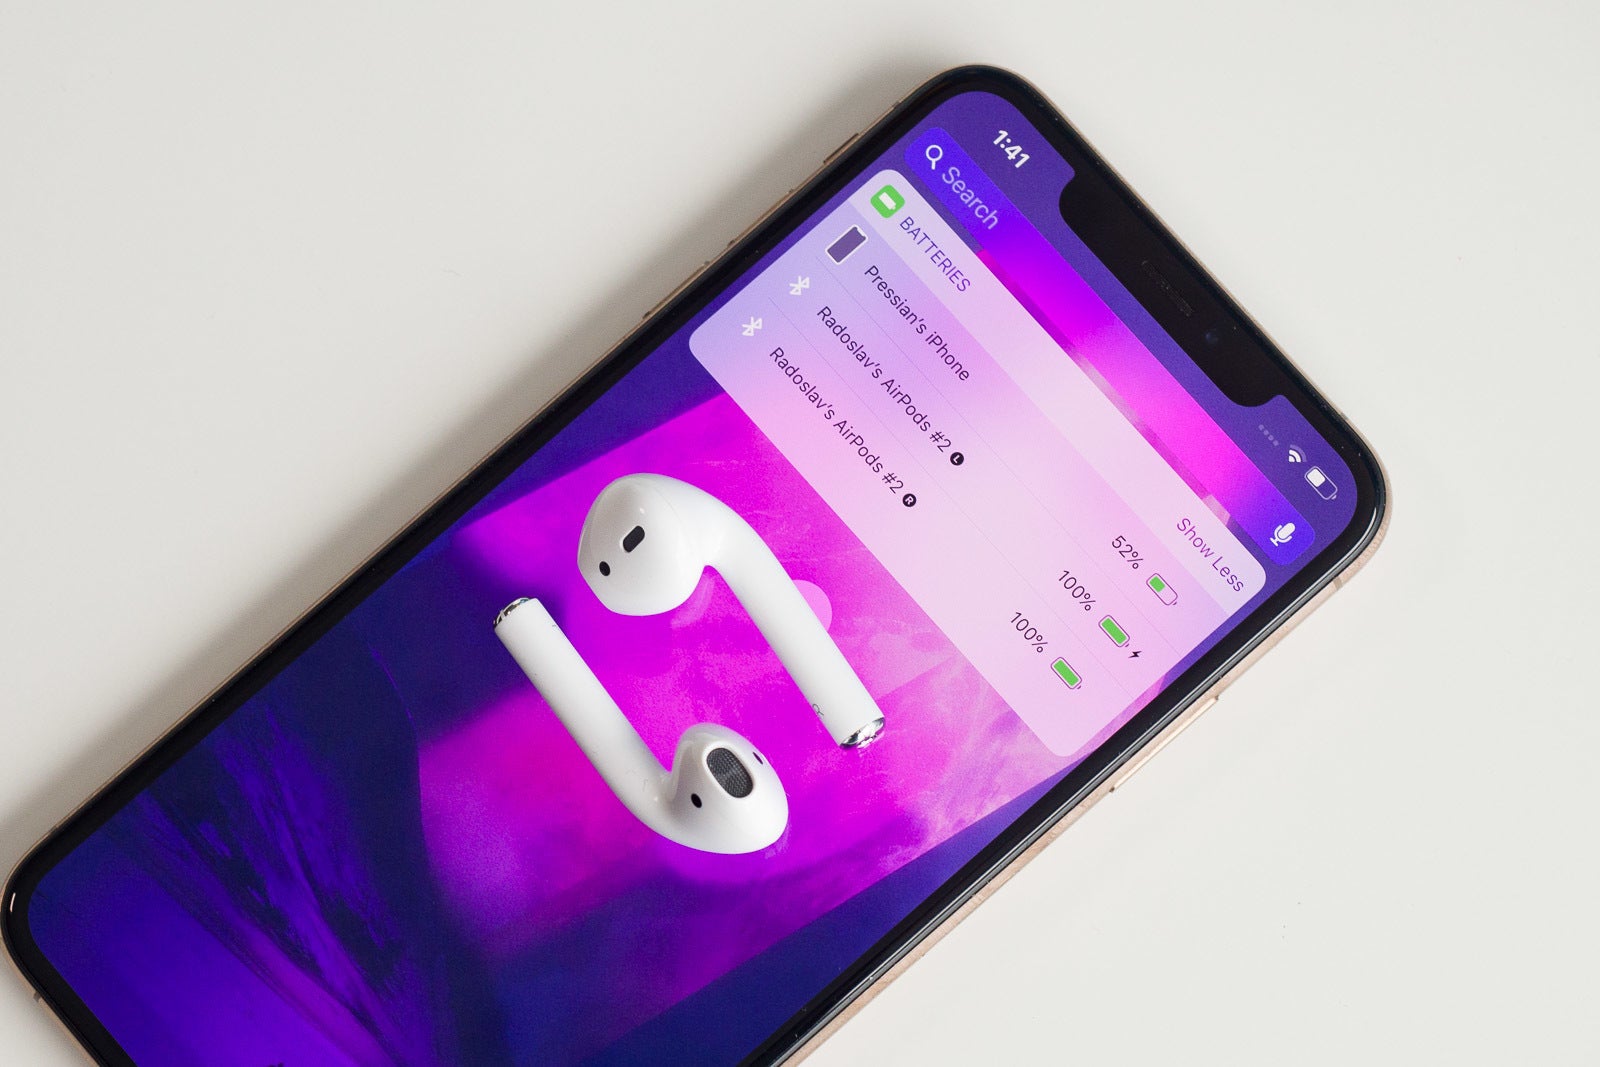 A large portion of AirPods, iPhones, and iPads could soon be manufactured outside China - Apple planning to shift large portion of production outside of China: report